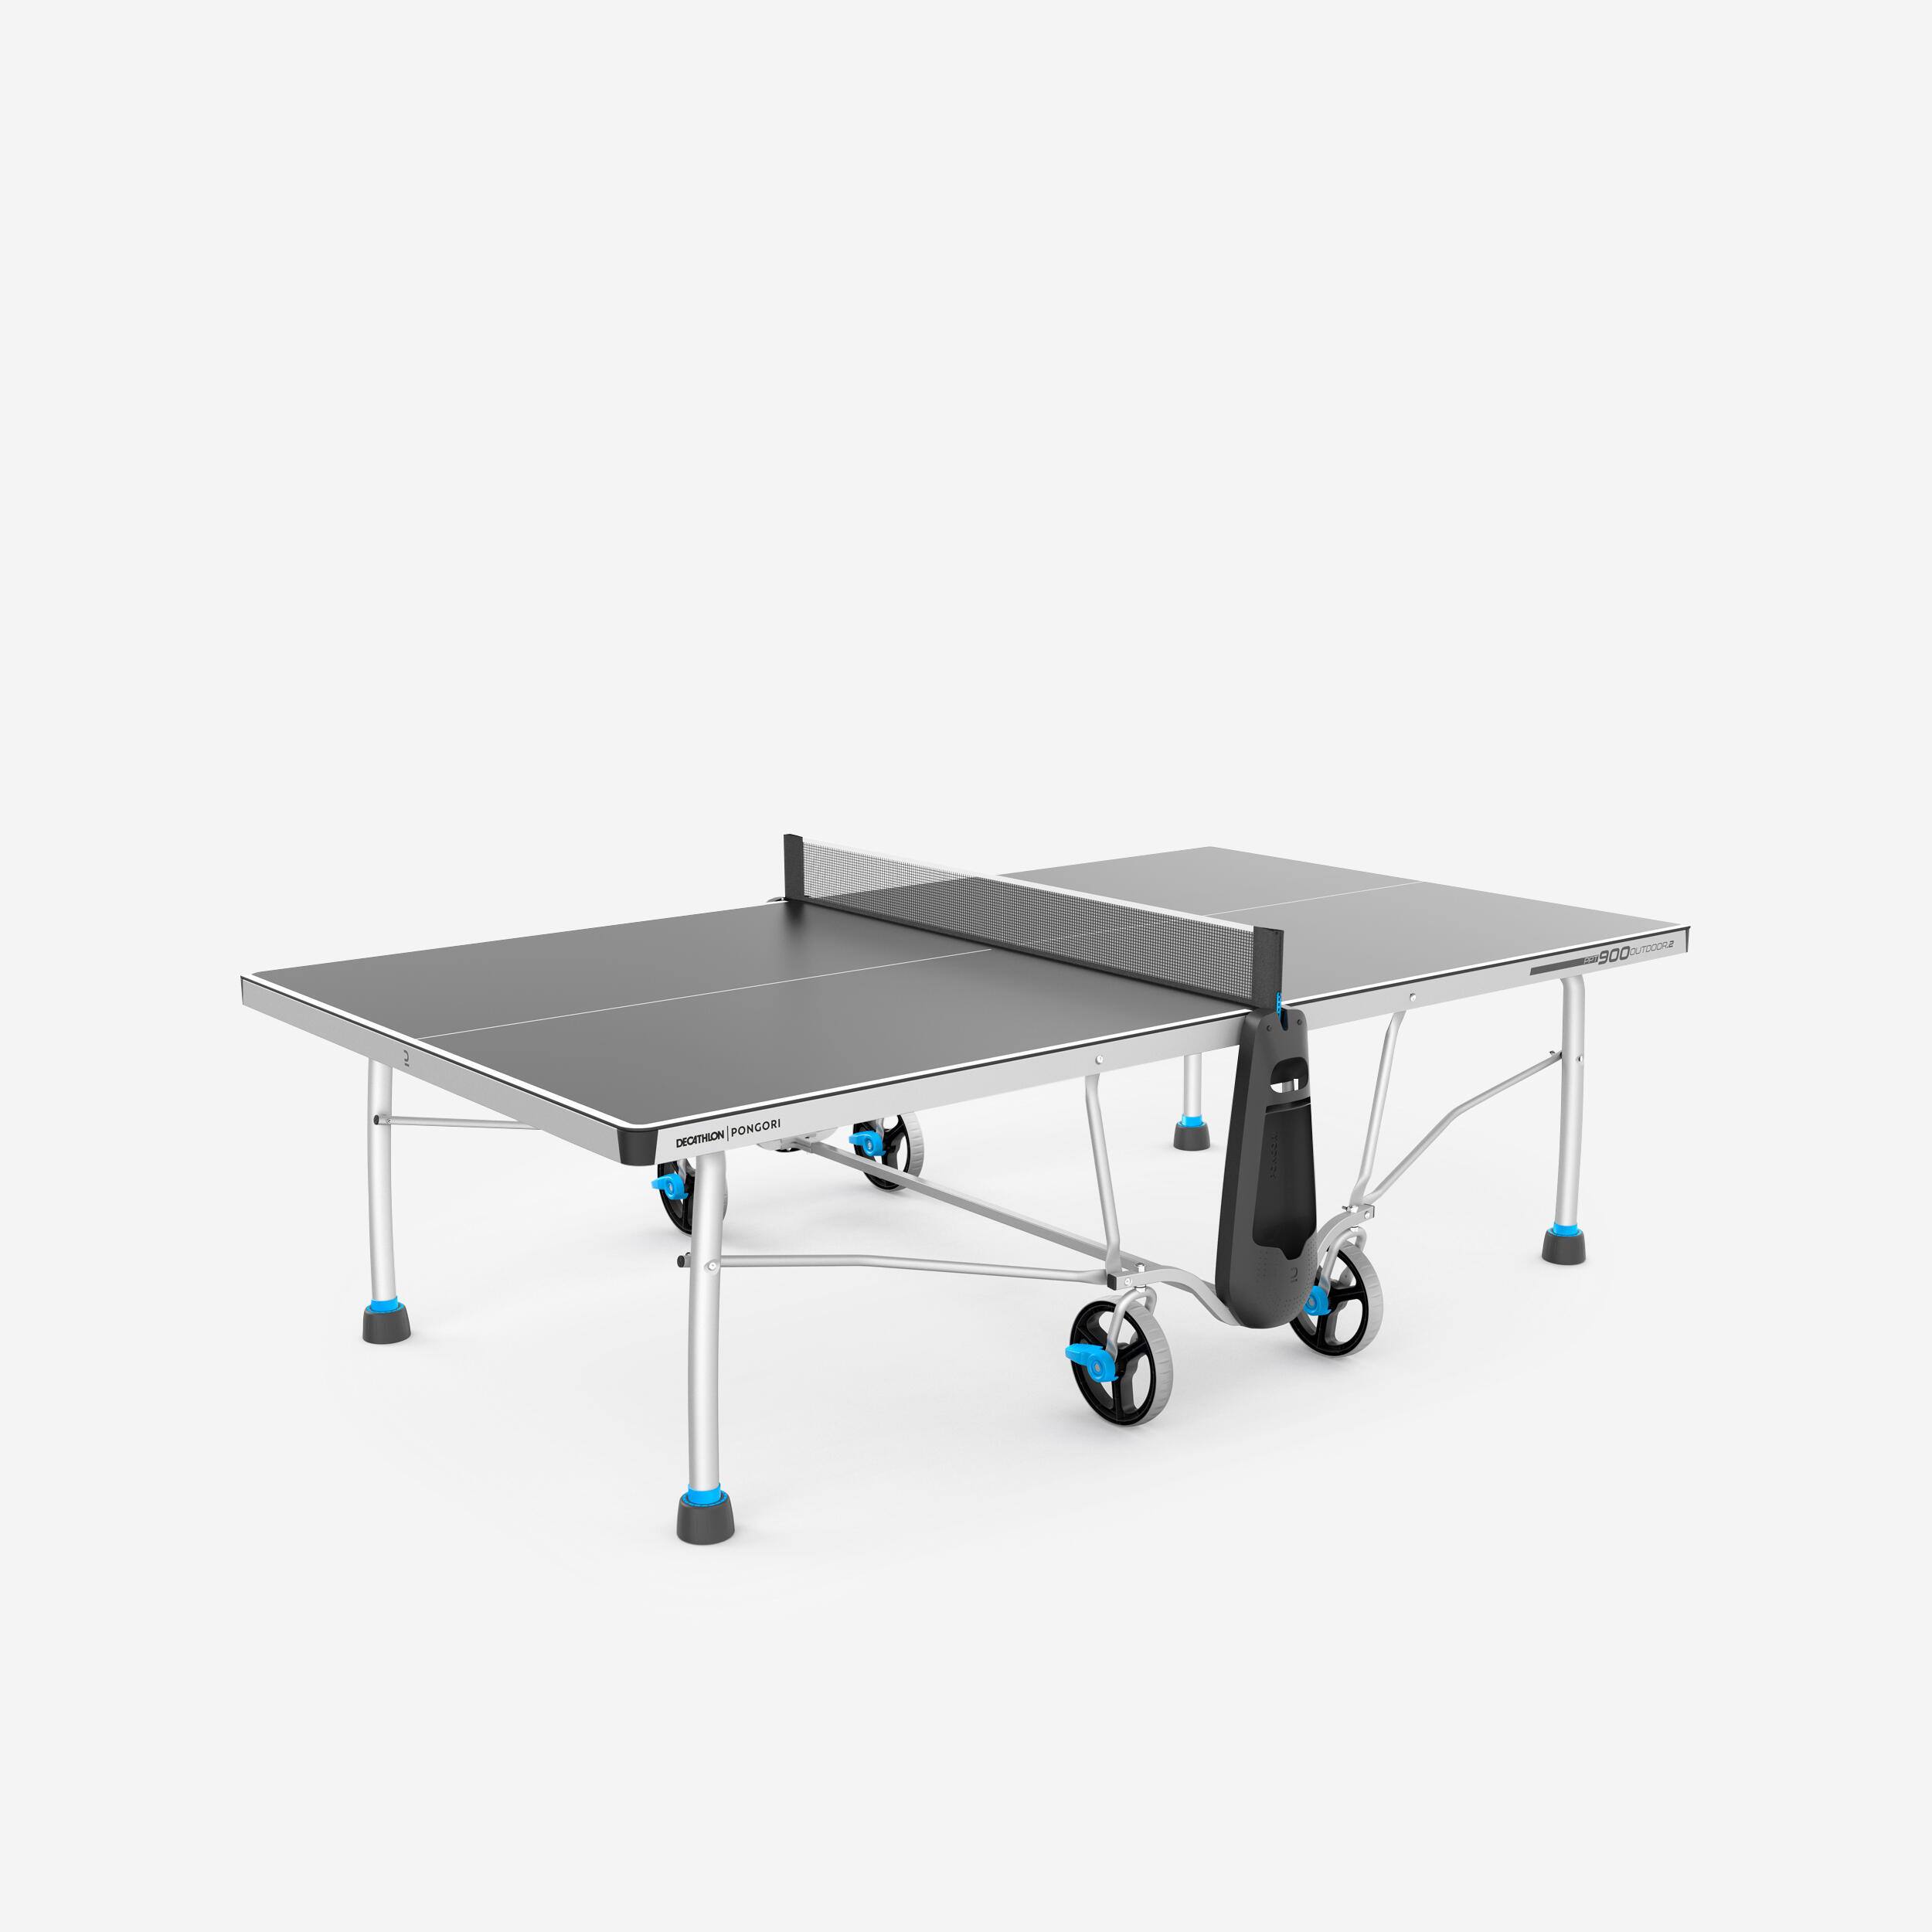 Table Tennis Table Outdoor - PPT 900.2 Grey